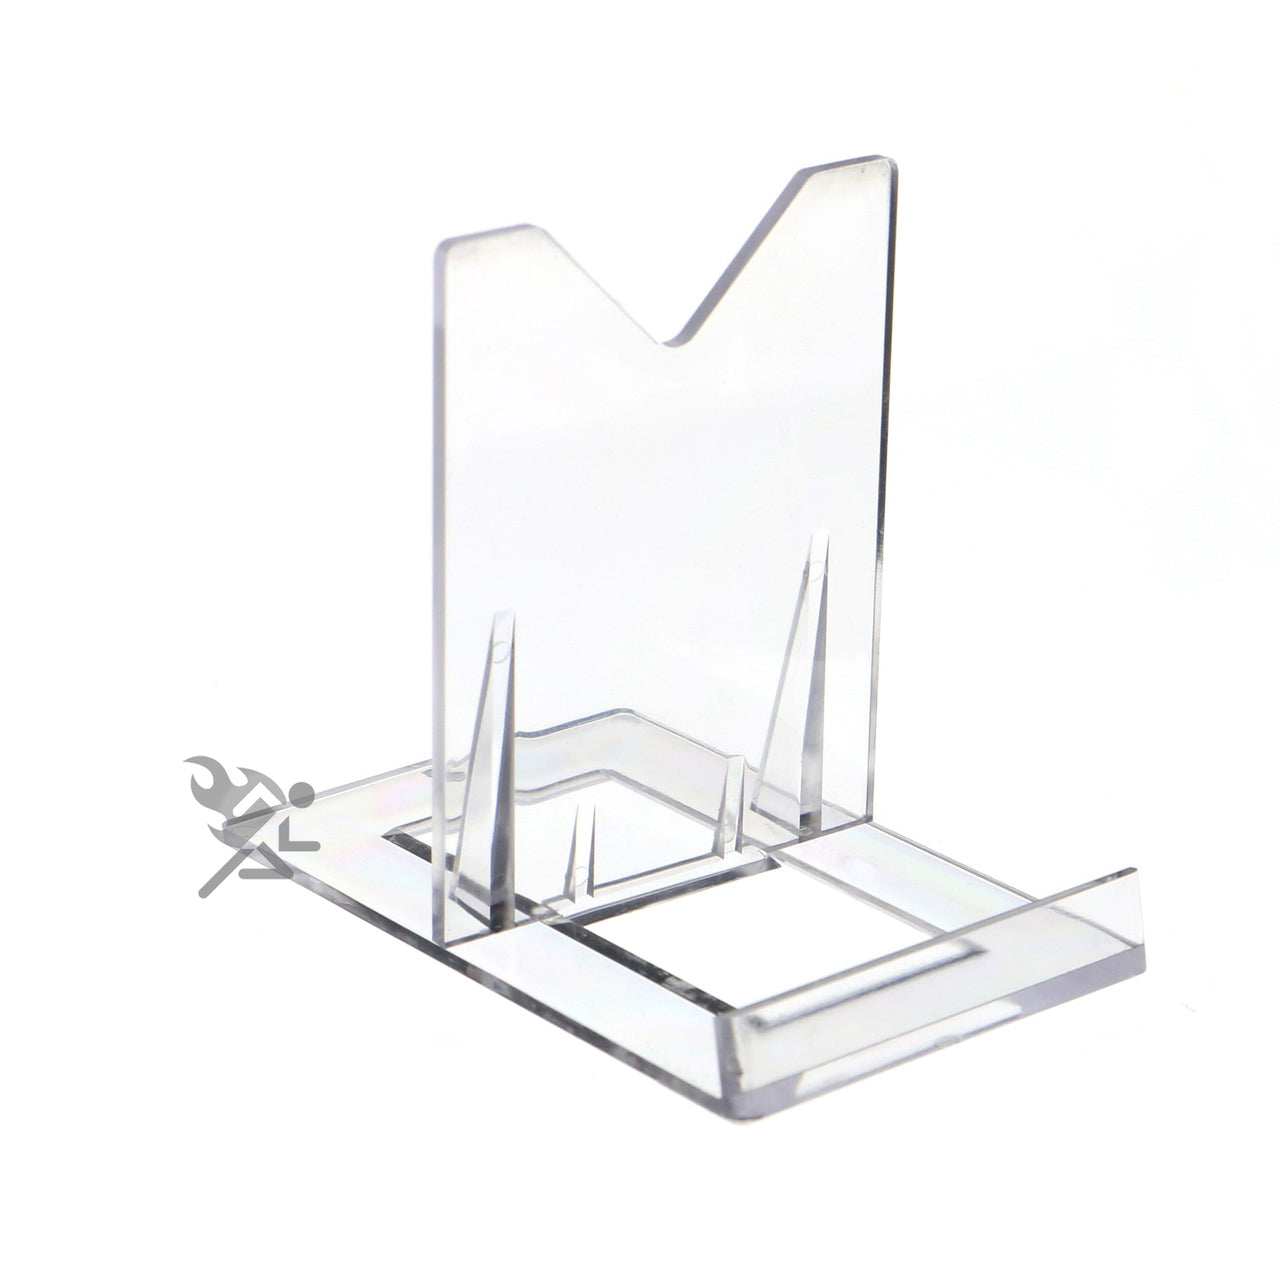 Two Piece Adjustable Display Stand Easels, 3-1/8" High